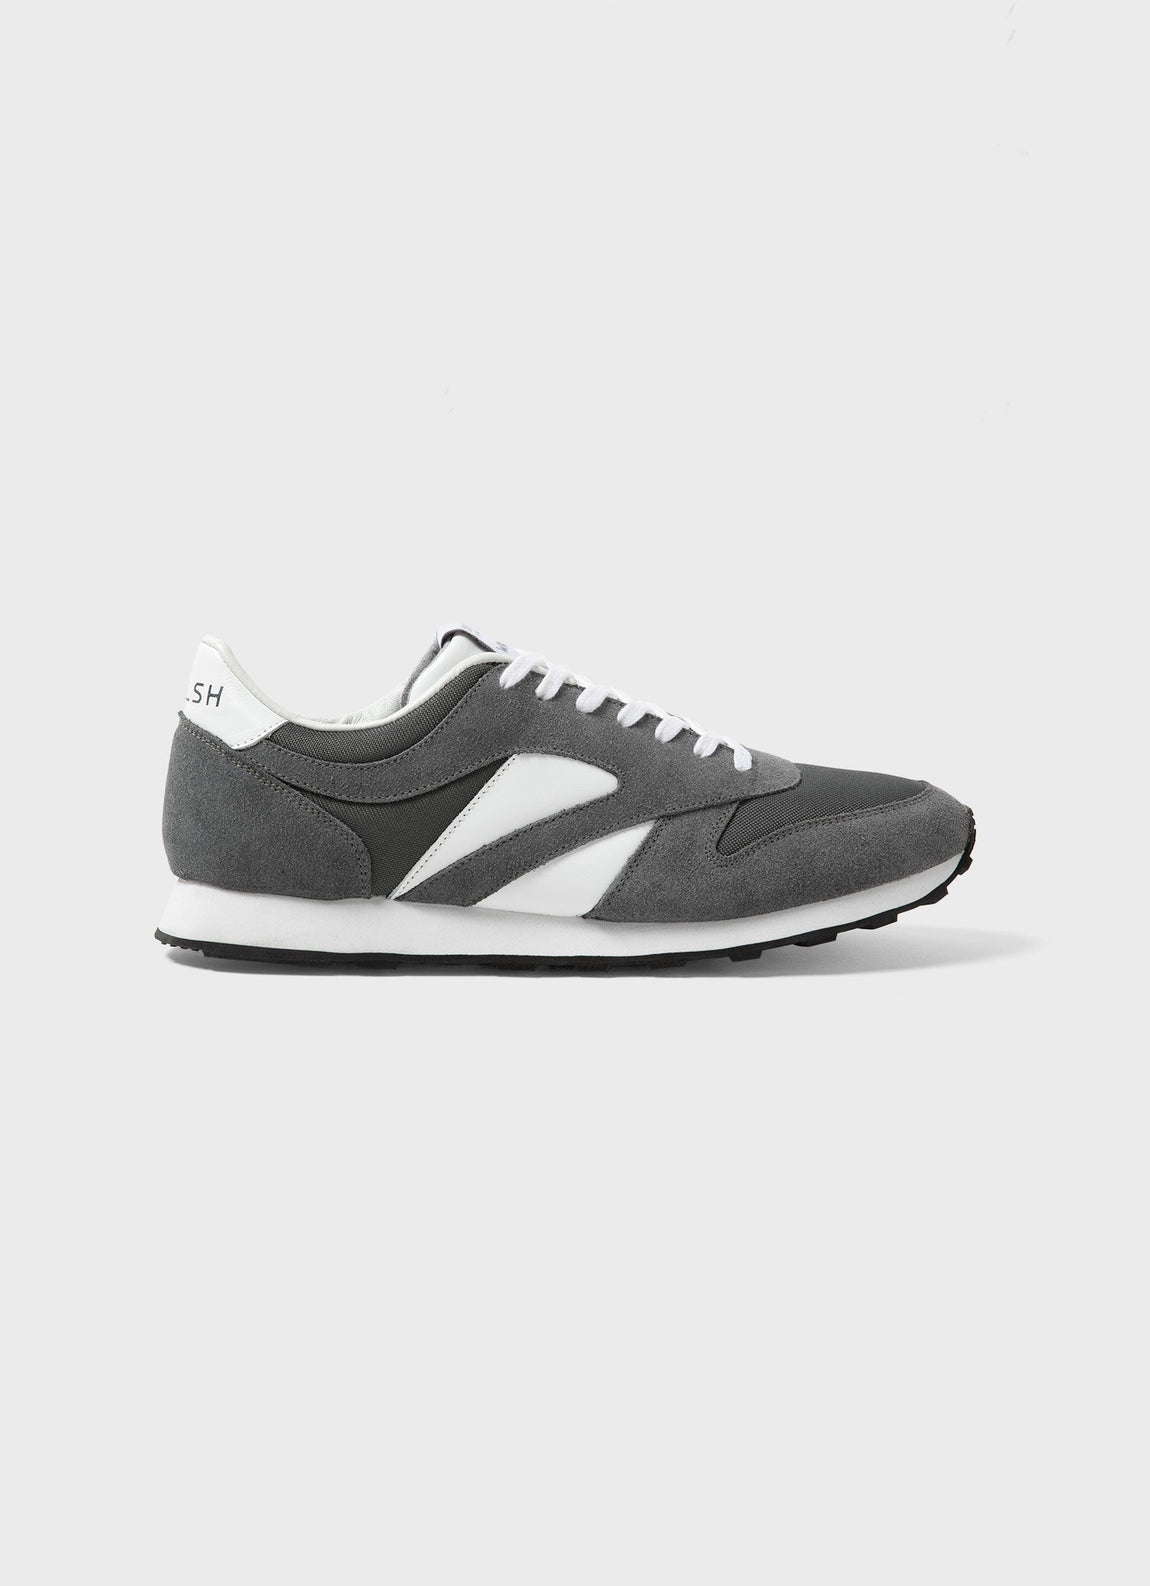 Men's Walsh and Sunspel Trainer in Grey/White